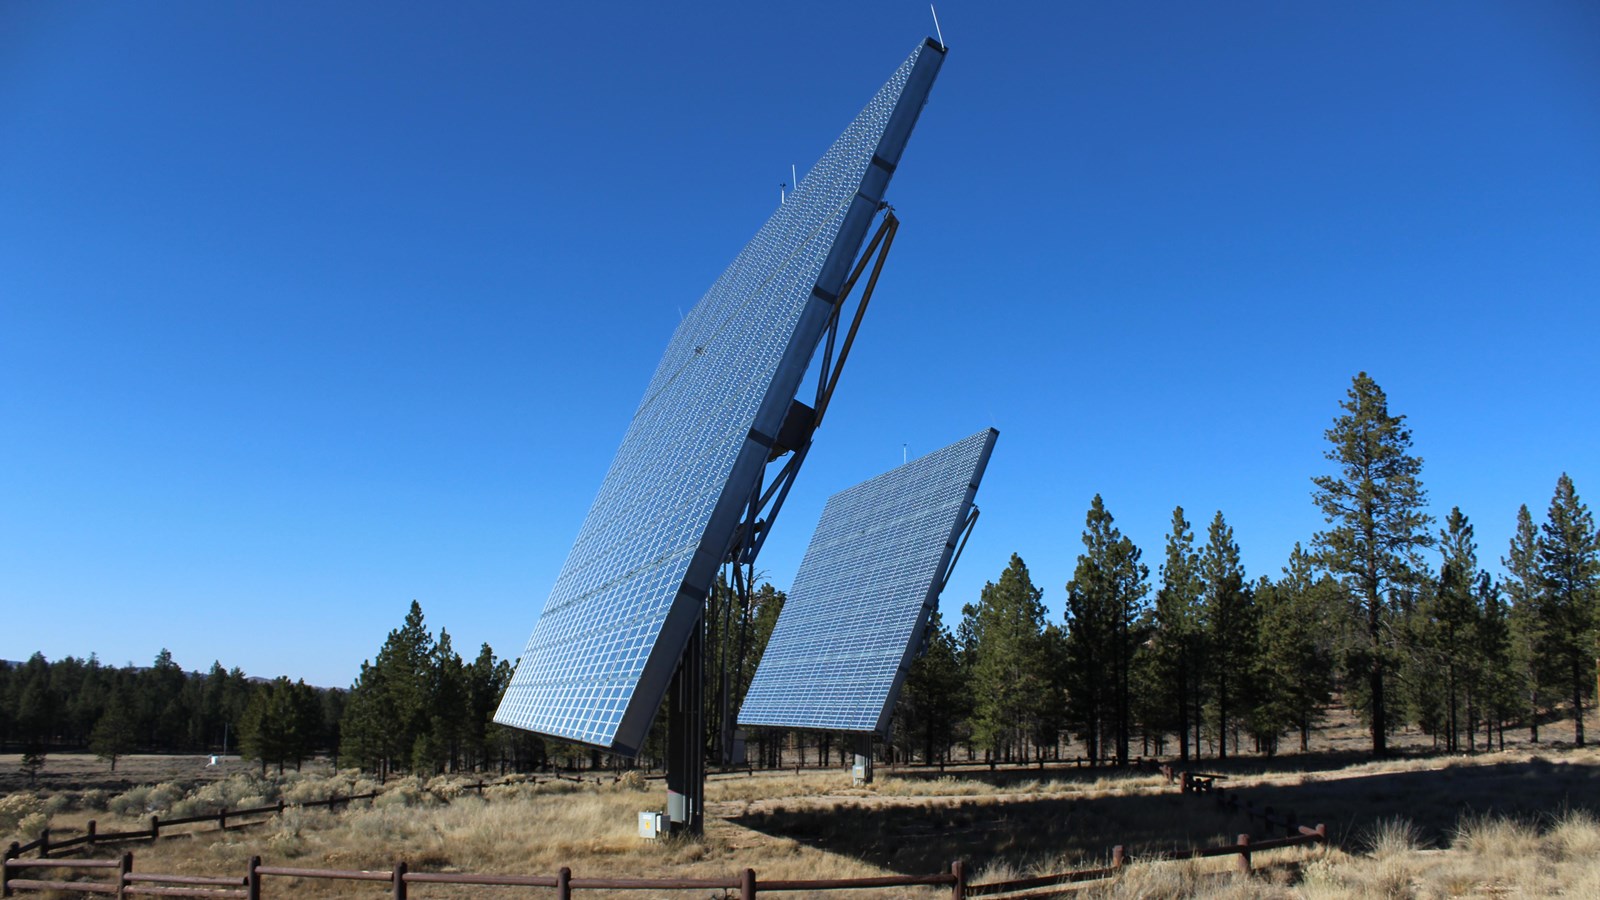 Two solar panels stand in field surrounded by brown wooden fence